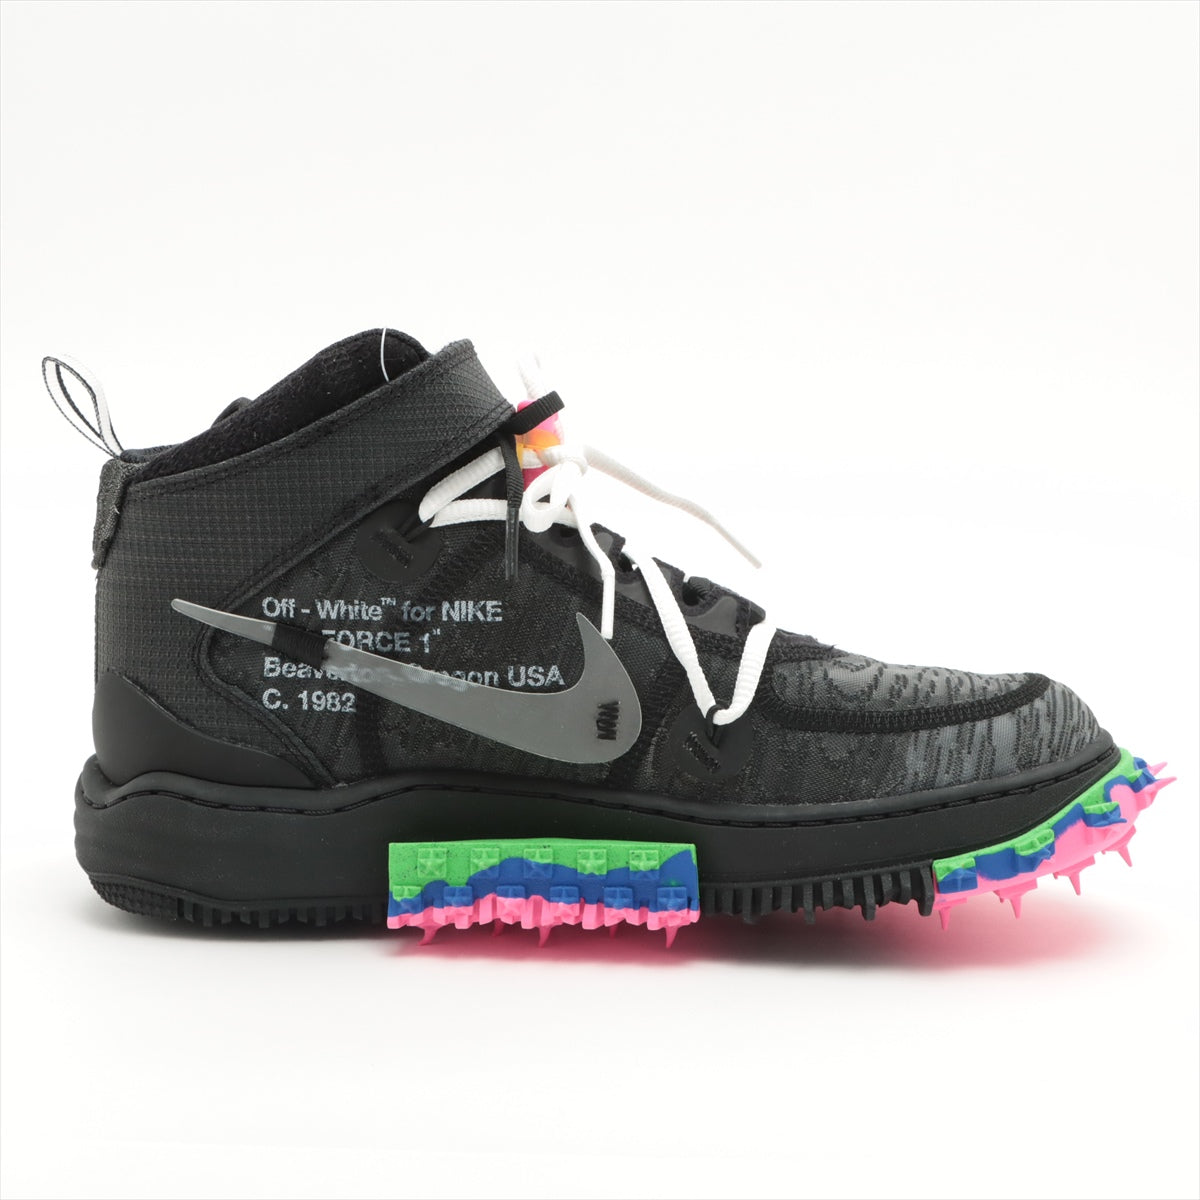 NIKE × OFF-WHITE AIR FORCE 1 MID Fabric High-top Sneakers 26㎝ Men's Black x Gray DD6290-001 There is a box